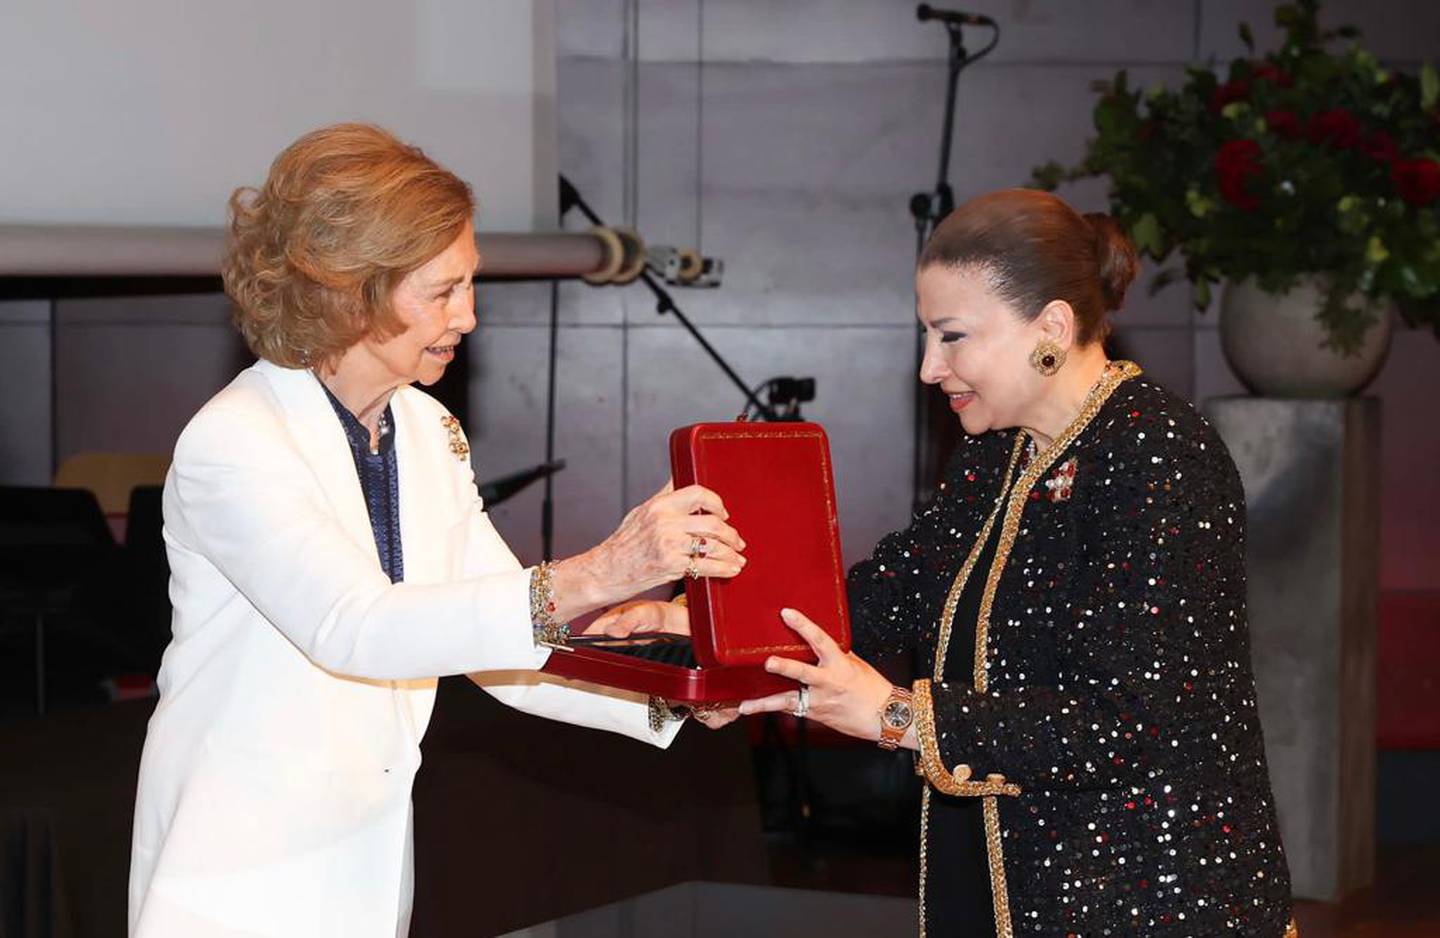 Abu Dhabi Music and Arts Foundation founder Huda Alkhamis Kanoo receives Medal of Honor from Queen Sofia of Spain